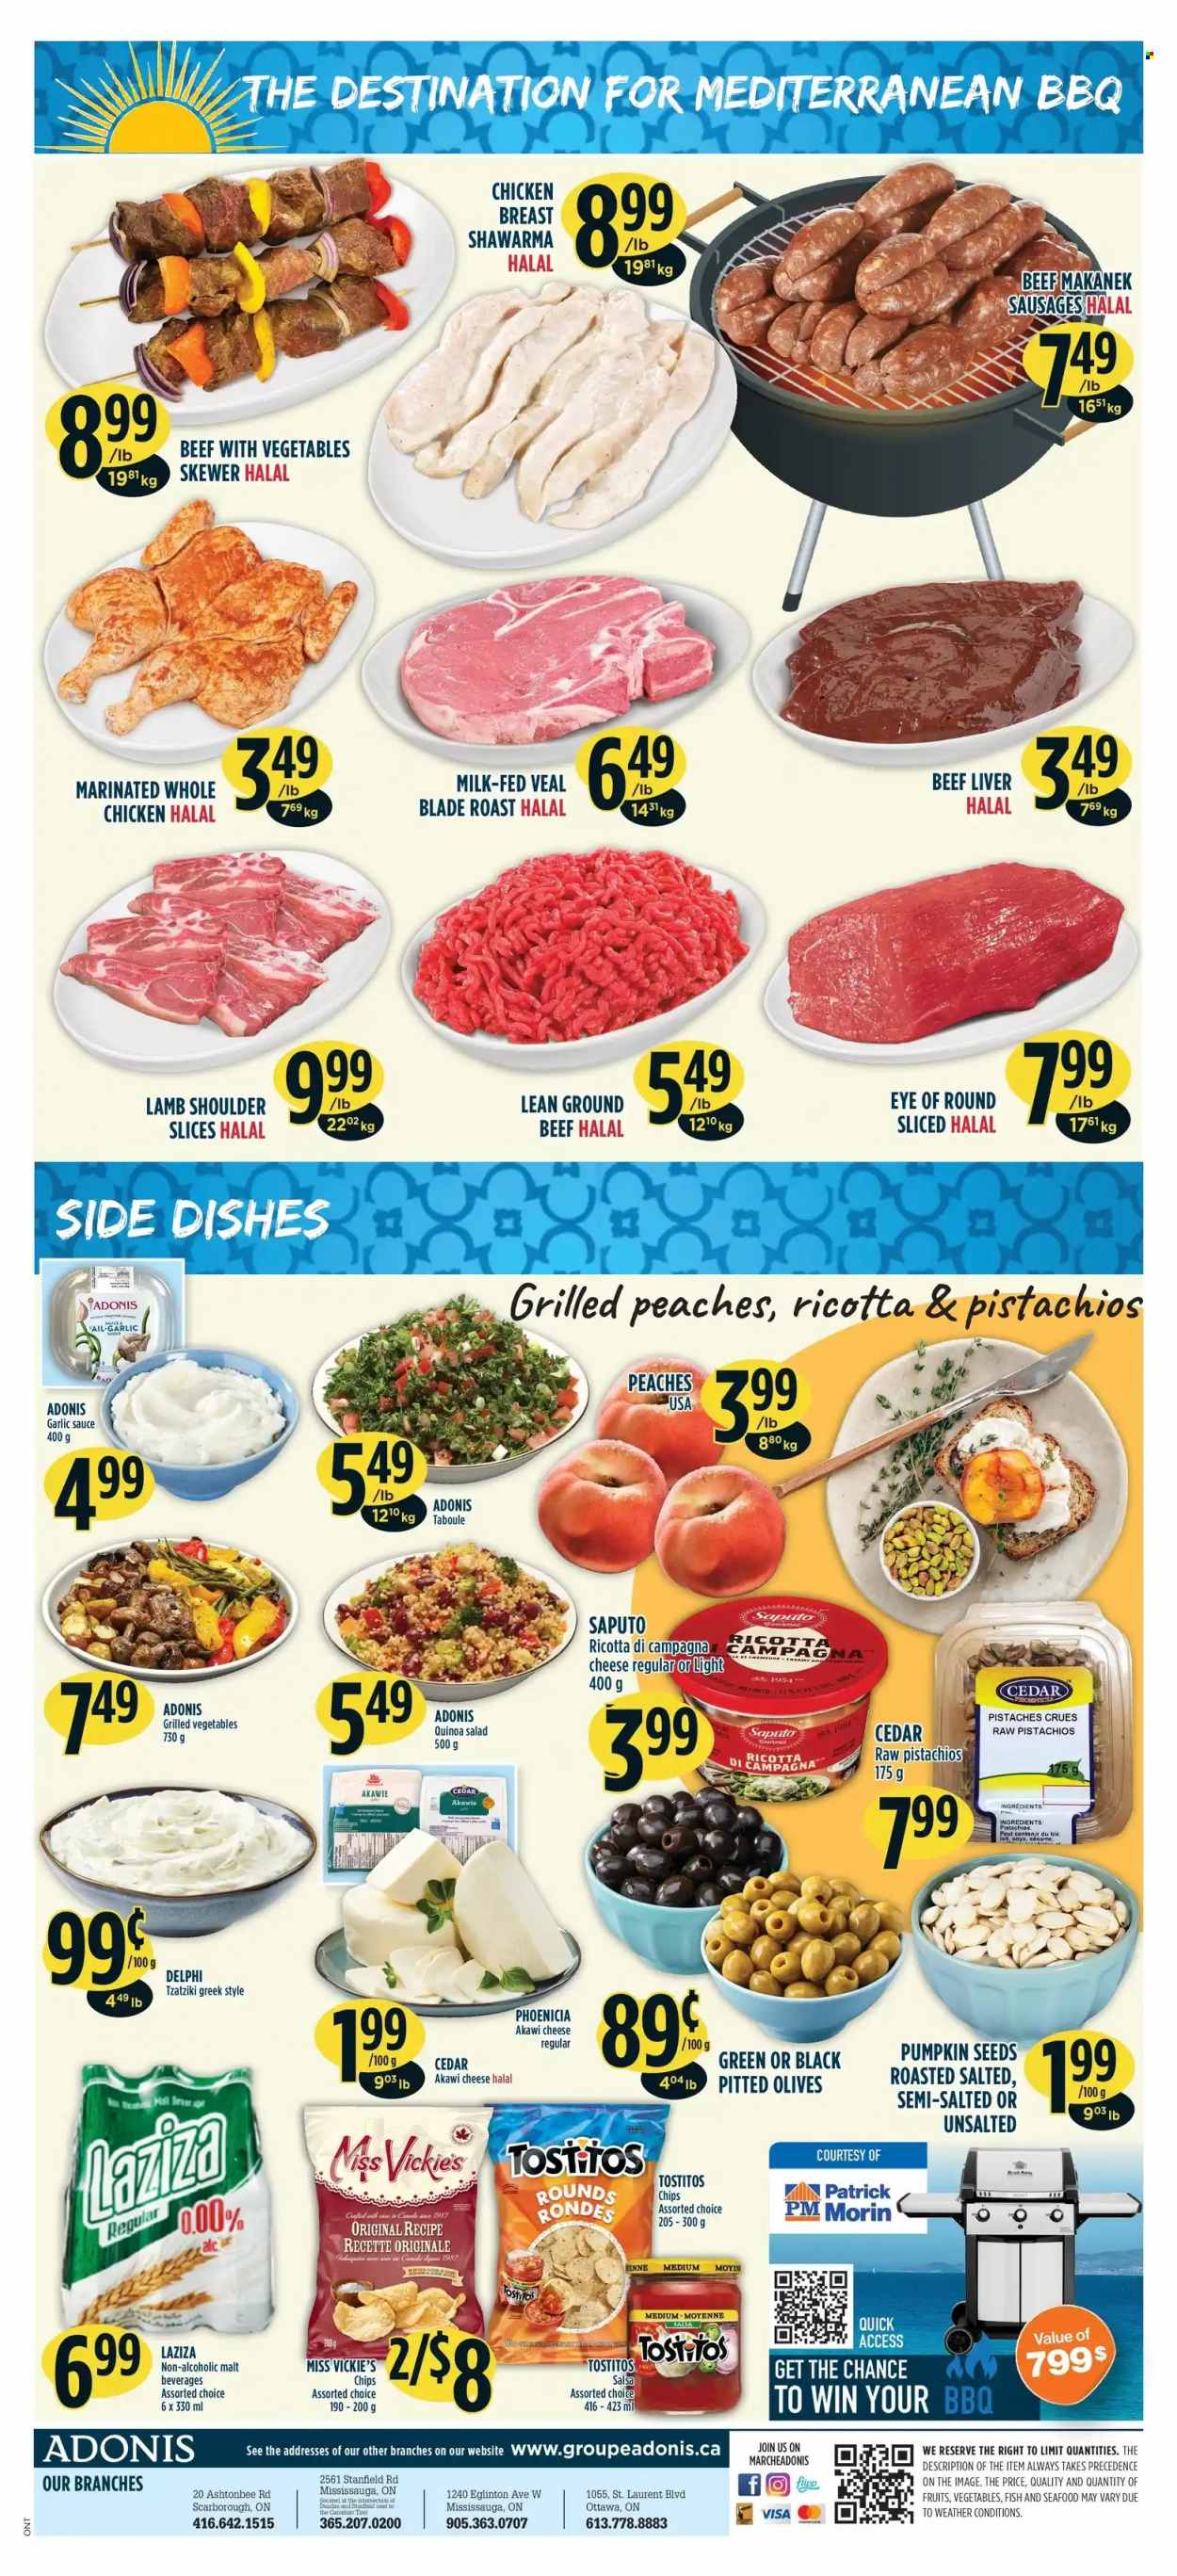 thumbnail - Adonis Flyer - May 19, 2022 - May 25, 2022 - Sales products - peaches, seafood, sausage, tzatziki, cheese, milk, chips, Tostitos, malt, salsa, garlic sauce, pistachios, pumpkin seeds, whole chicken, chicken breasts, chicken, beef liver, beef meat, ground beef, eye of round, lamb meat, lamb shoulder, quinoa, ricotta, olives. Page 2.